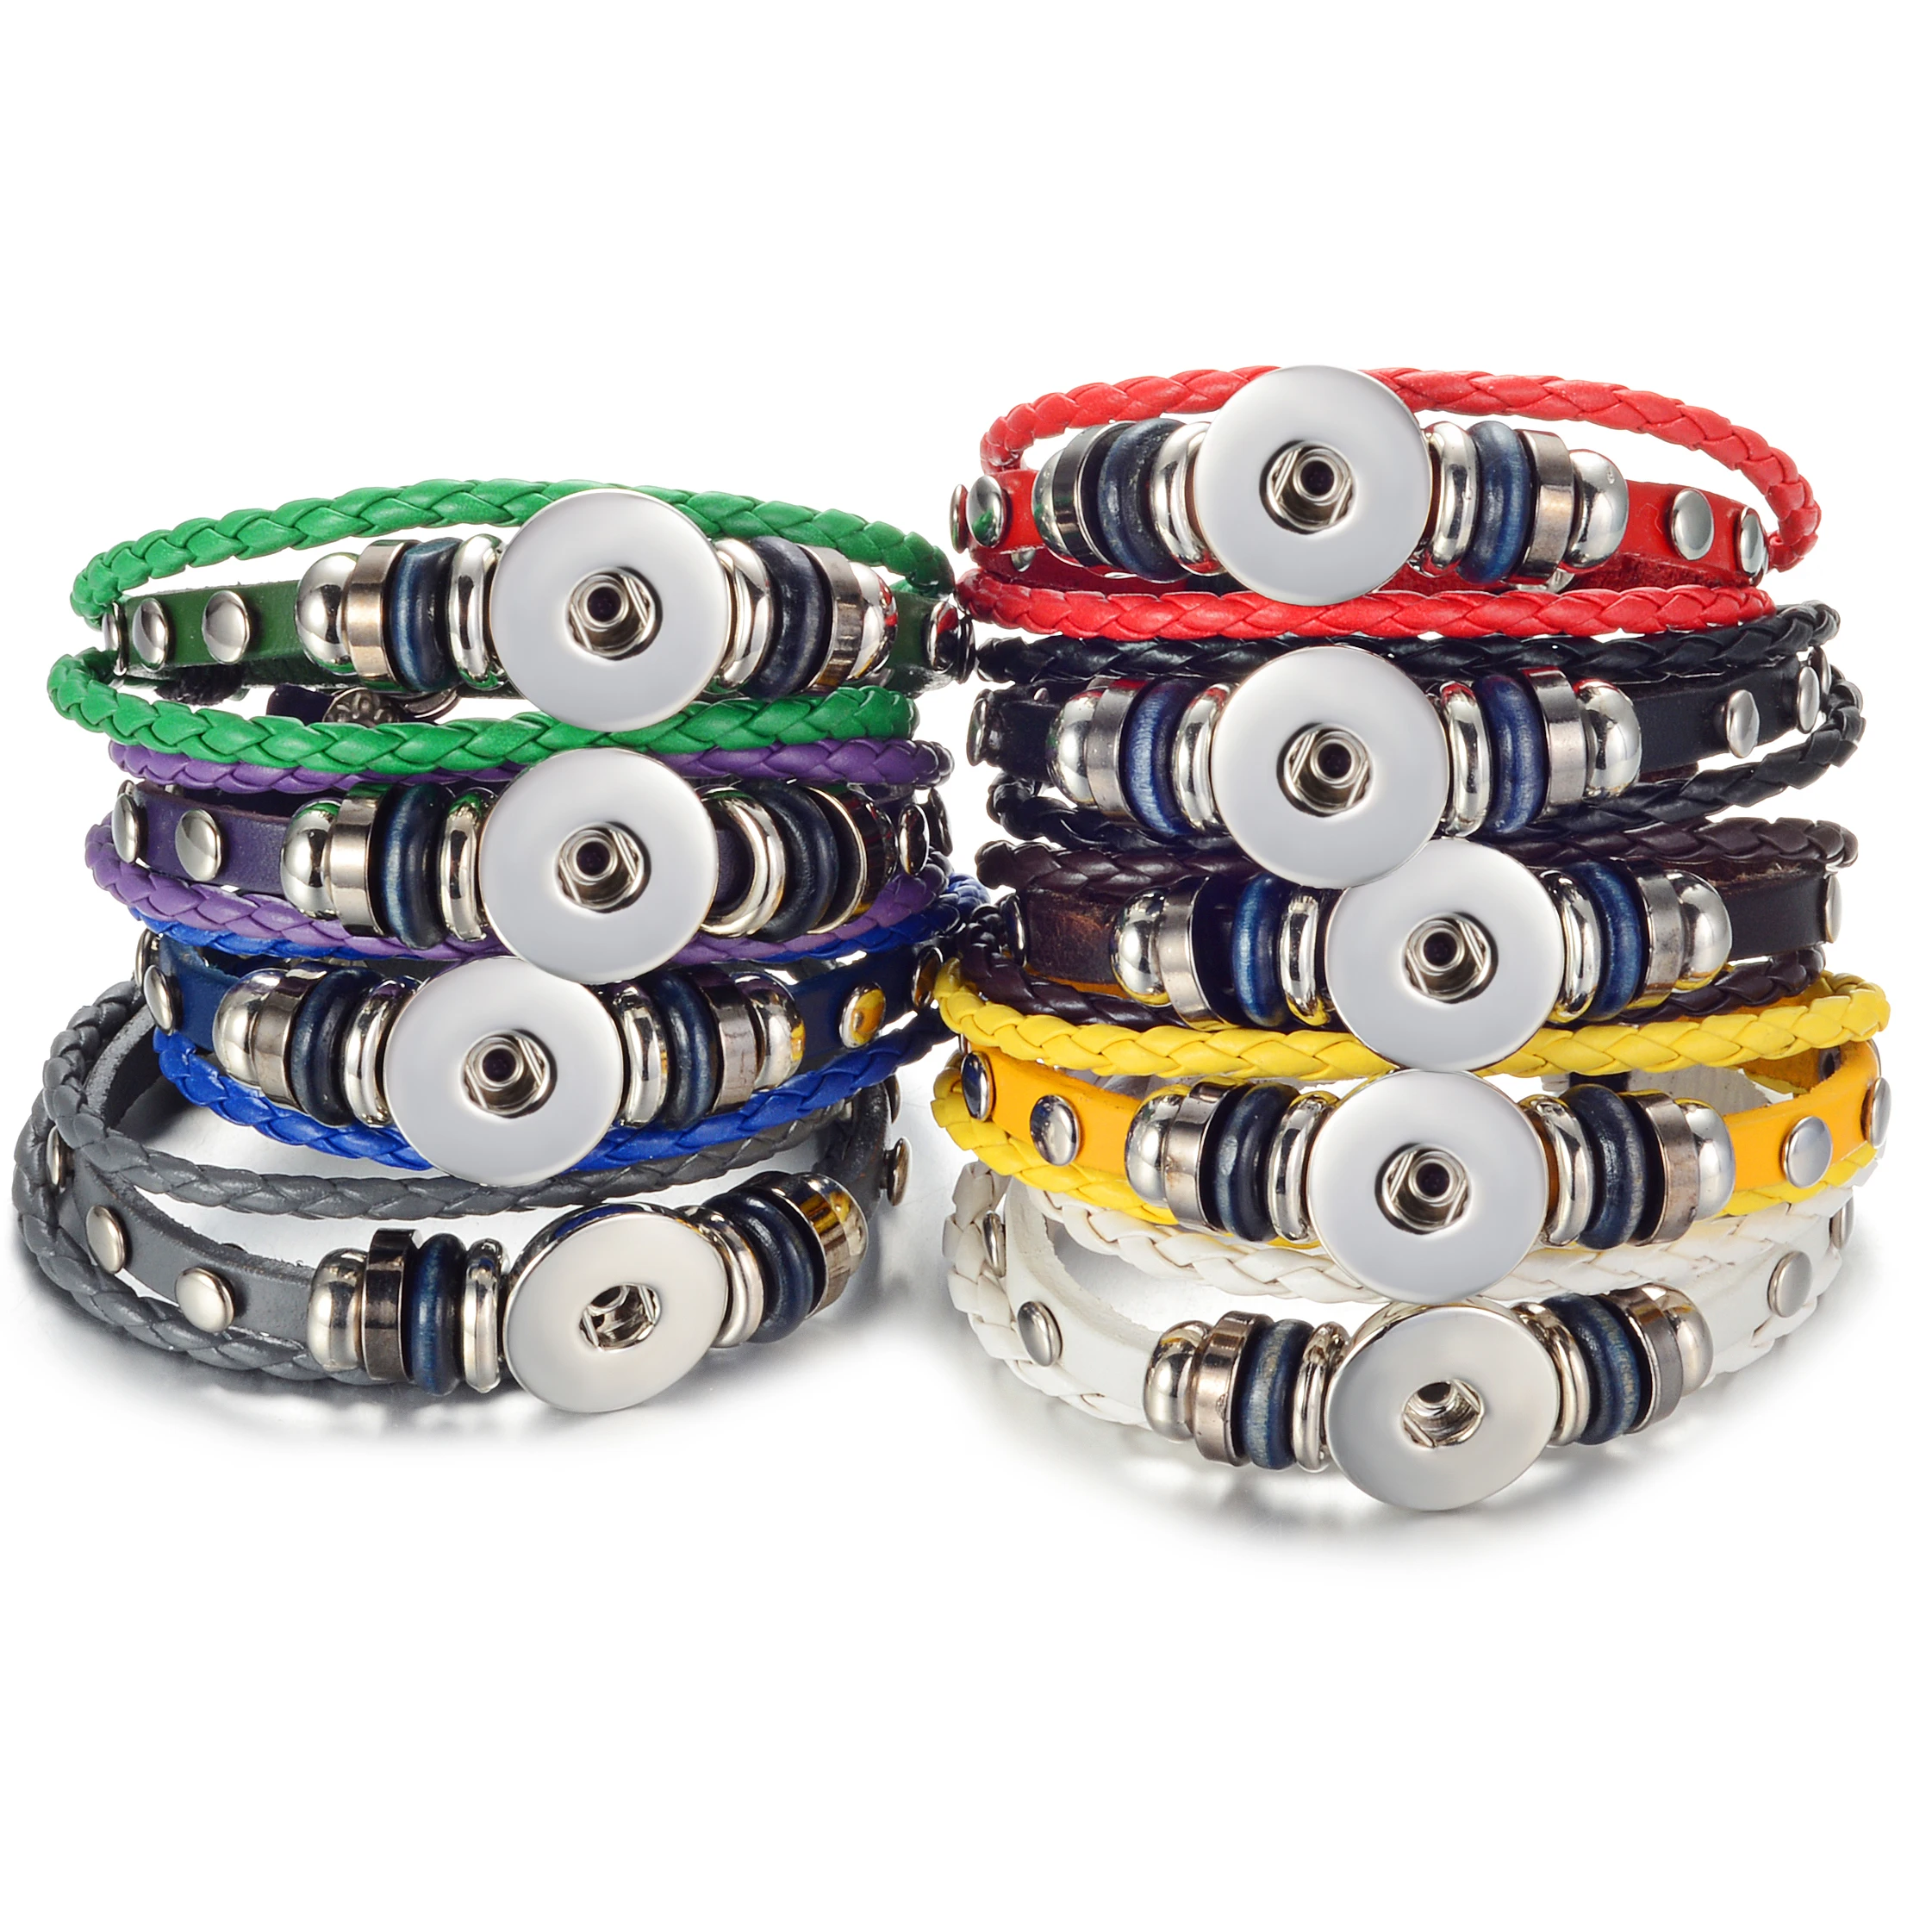 10PCS/Lot Vocheng Ginger Snap Button Jewelry Leather Braided Bracelet 18mm 7 Colors NN-461*10